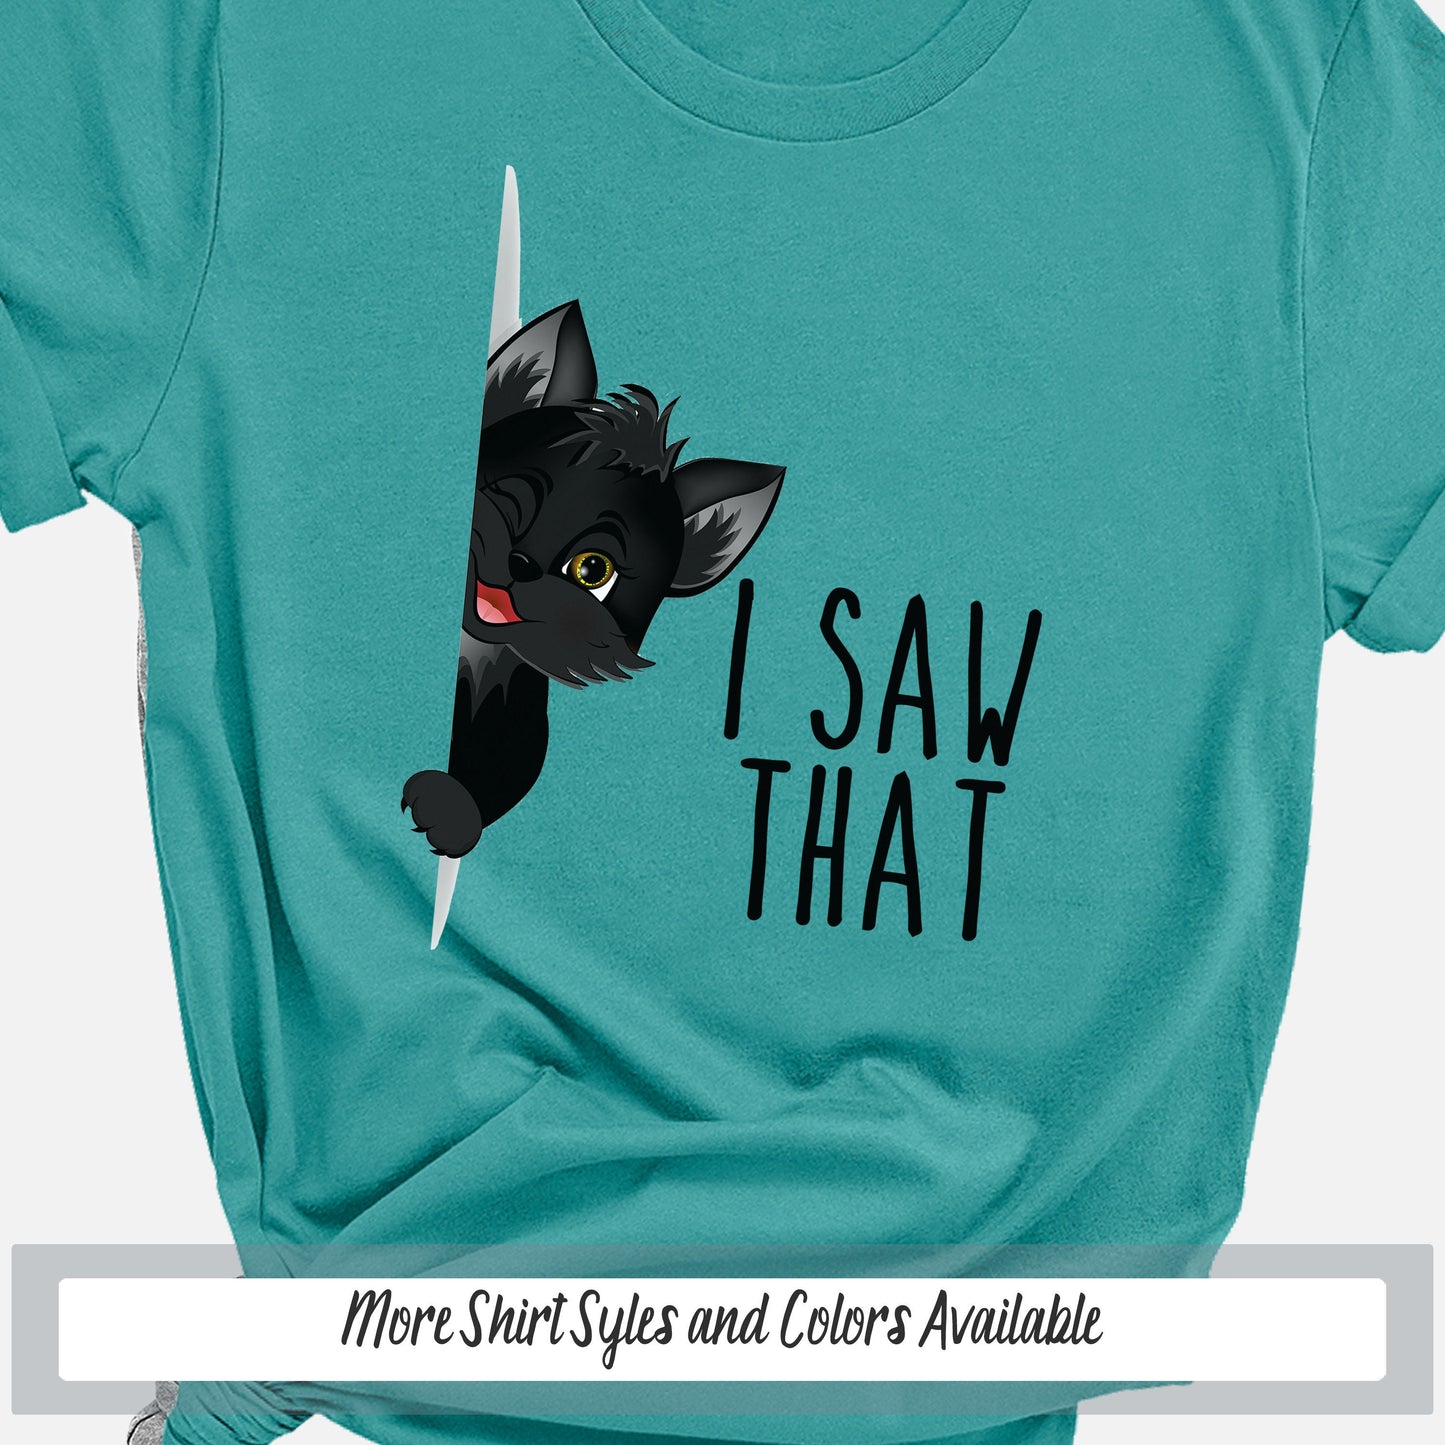 a t - shirt that says i saw that with a black cat holding a knife